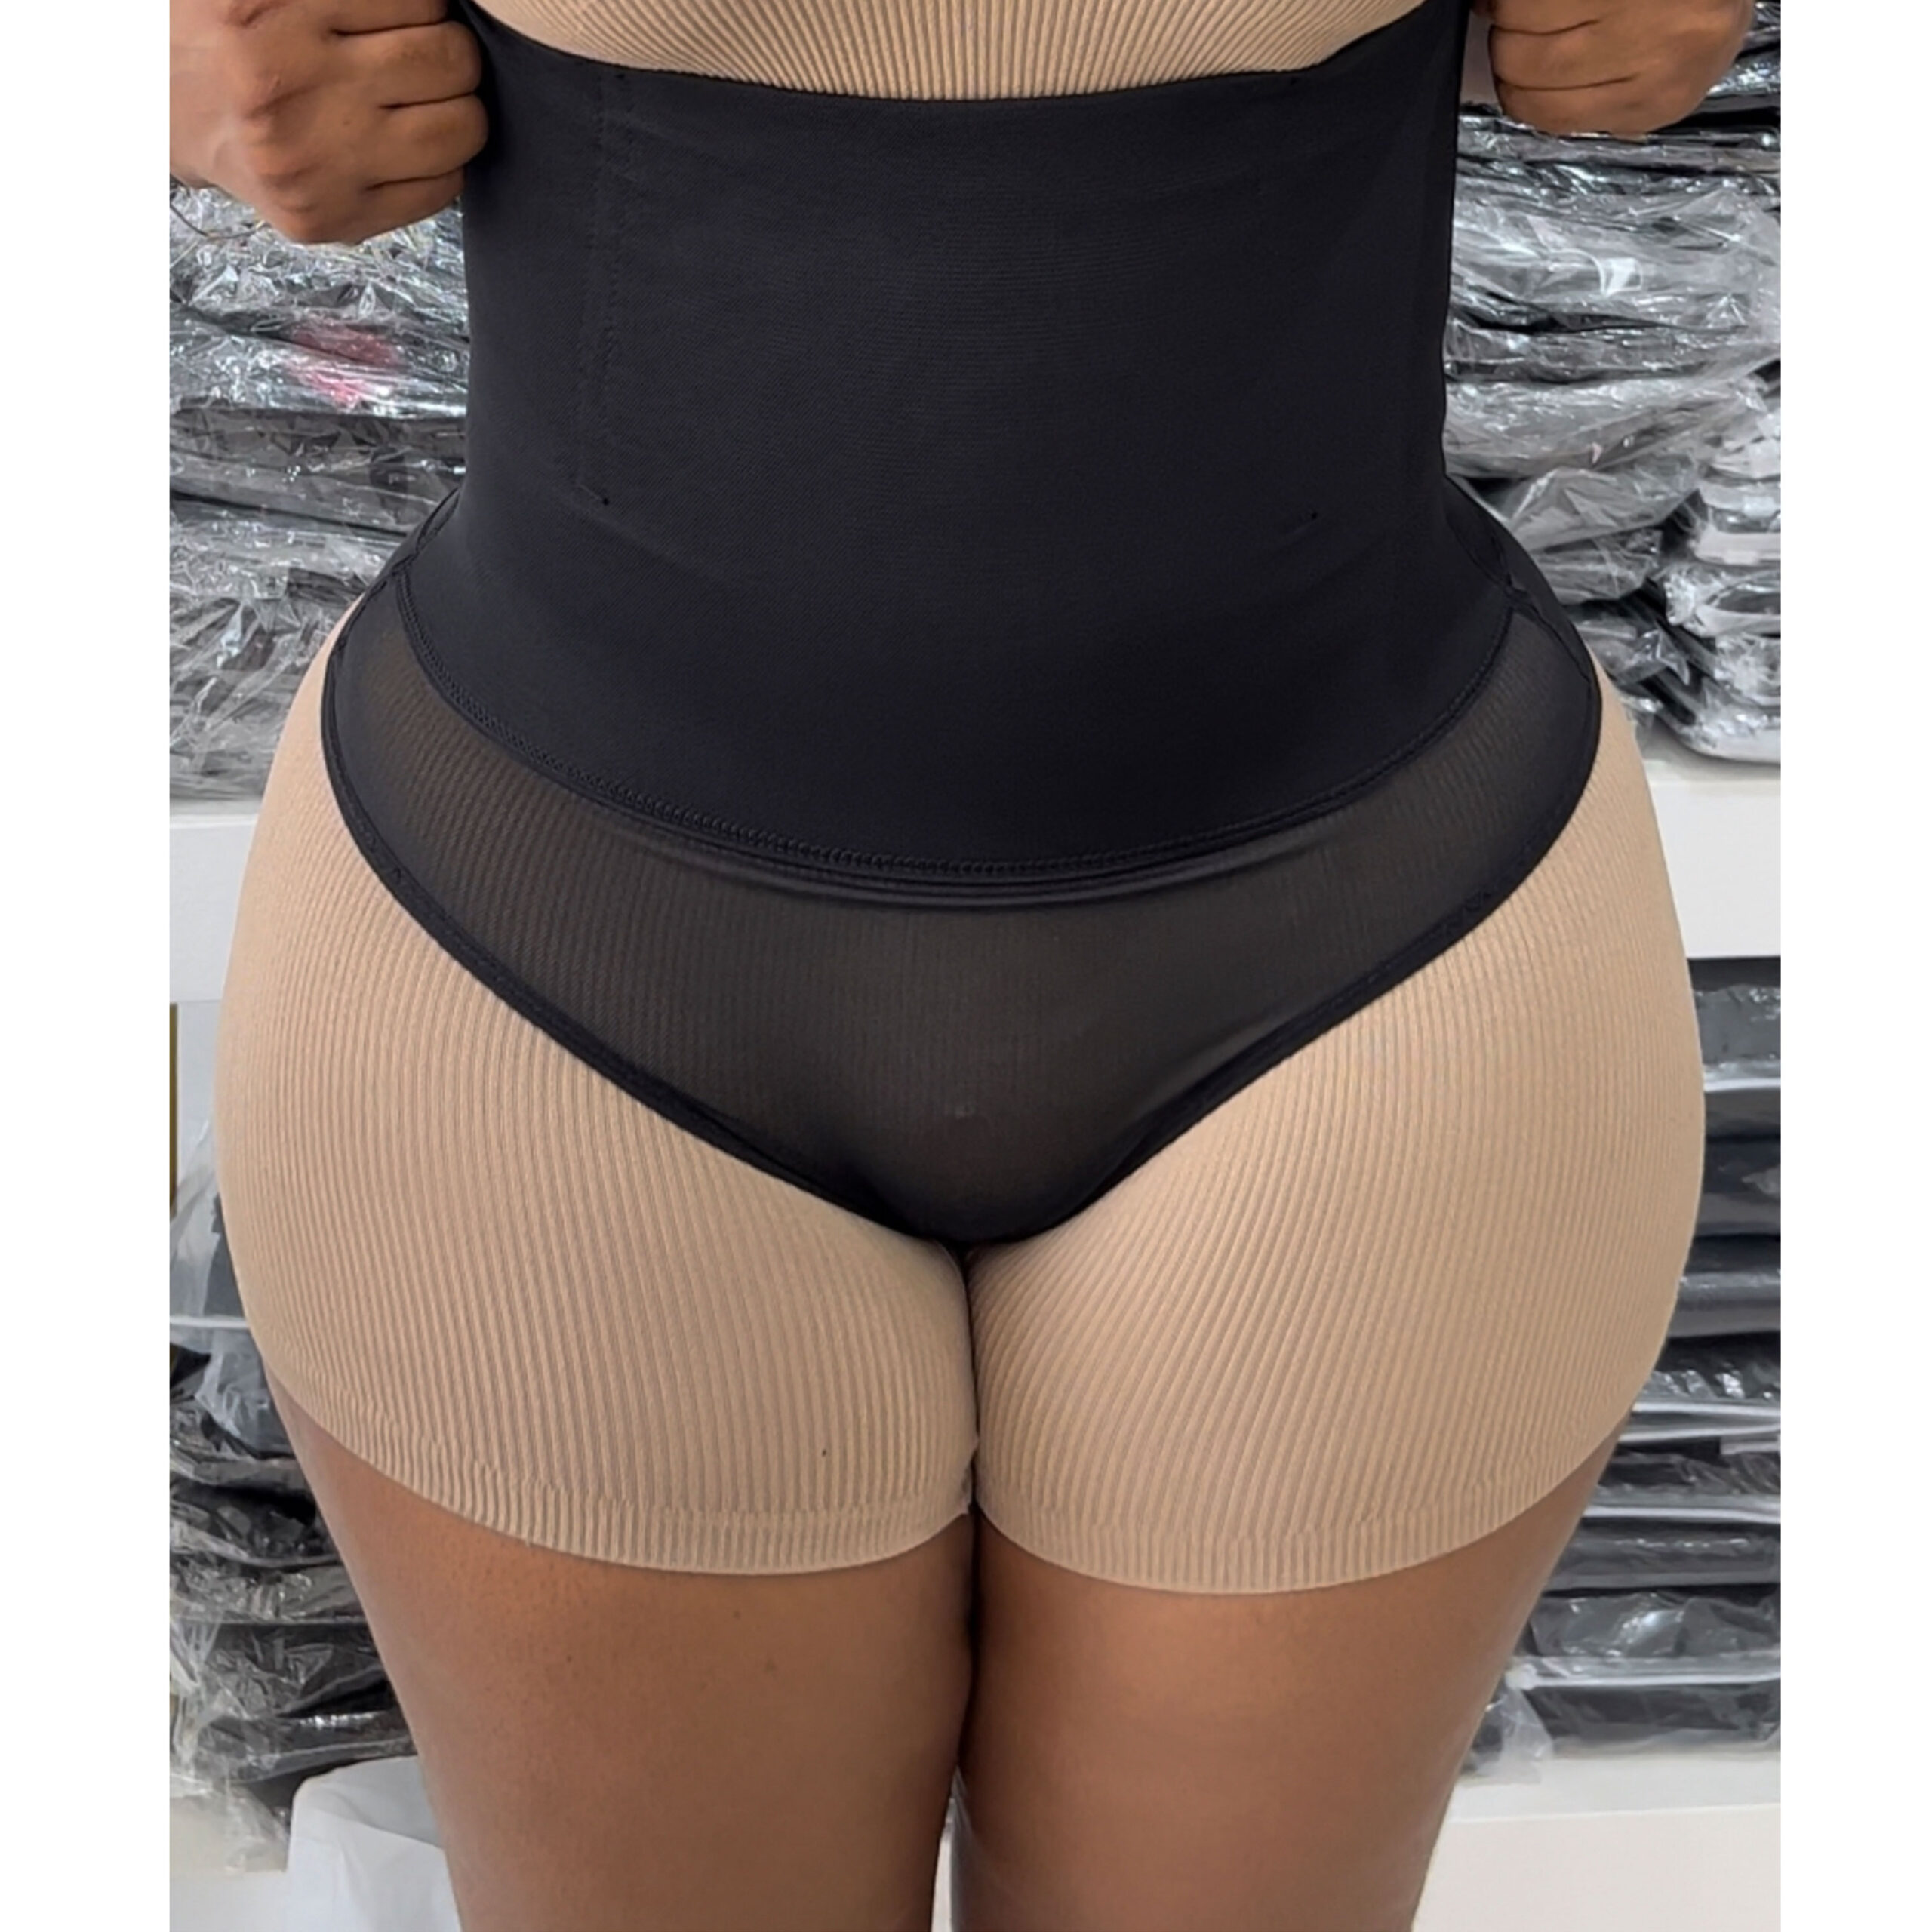 Tummy Control Thong – JusCurvy